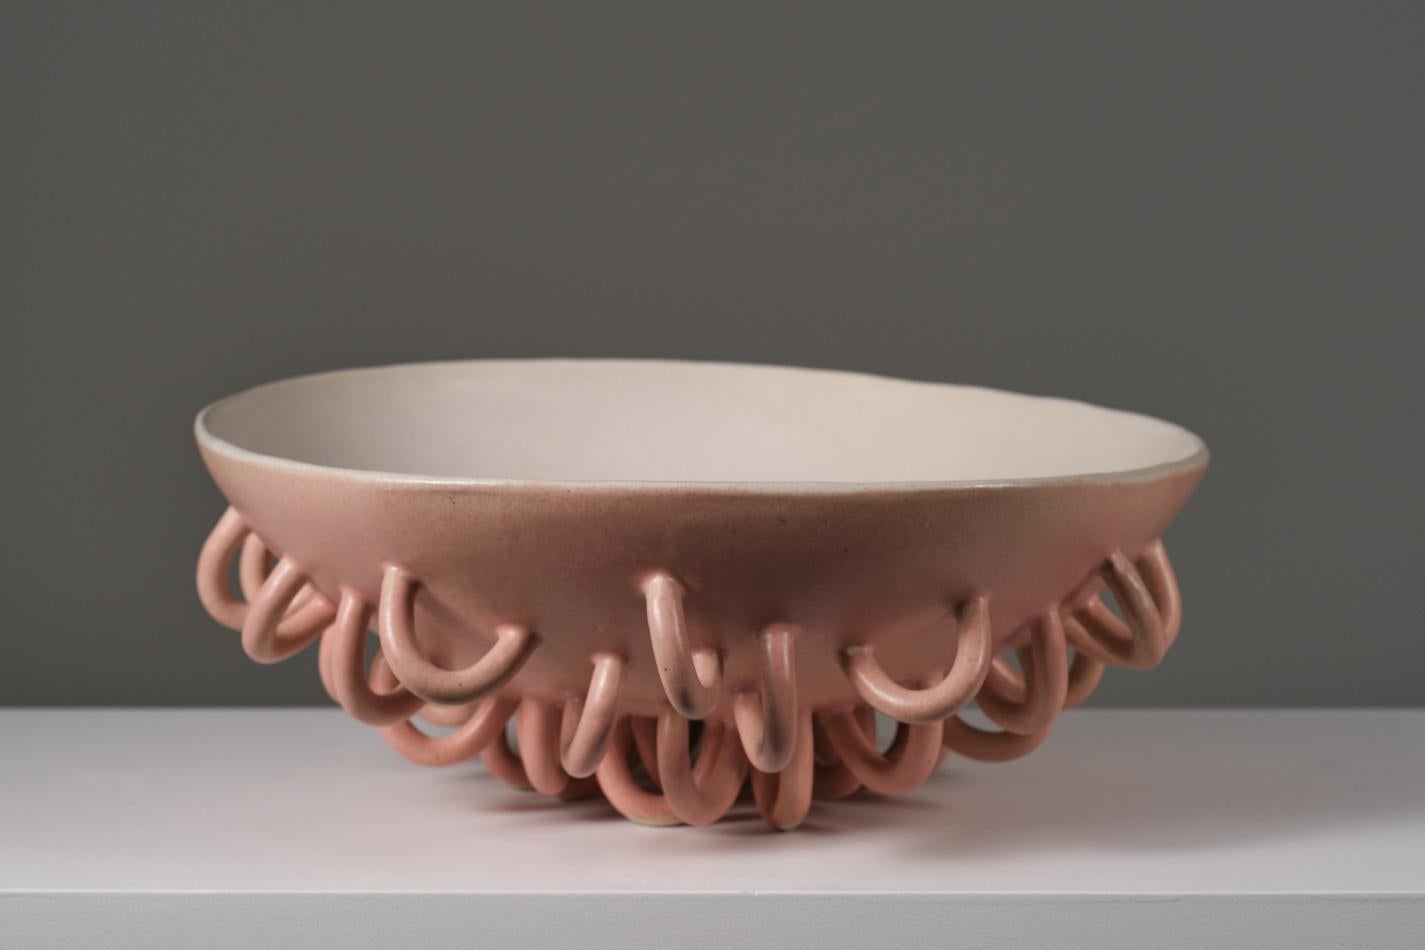 Working from ceramics as a broad discipline that includes design, sculpture and painting, this work belongs to a collection of objects in which the forceful volumetries dialogue with fragility, balance and color.

She has a degree on Ceramic and